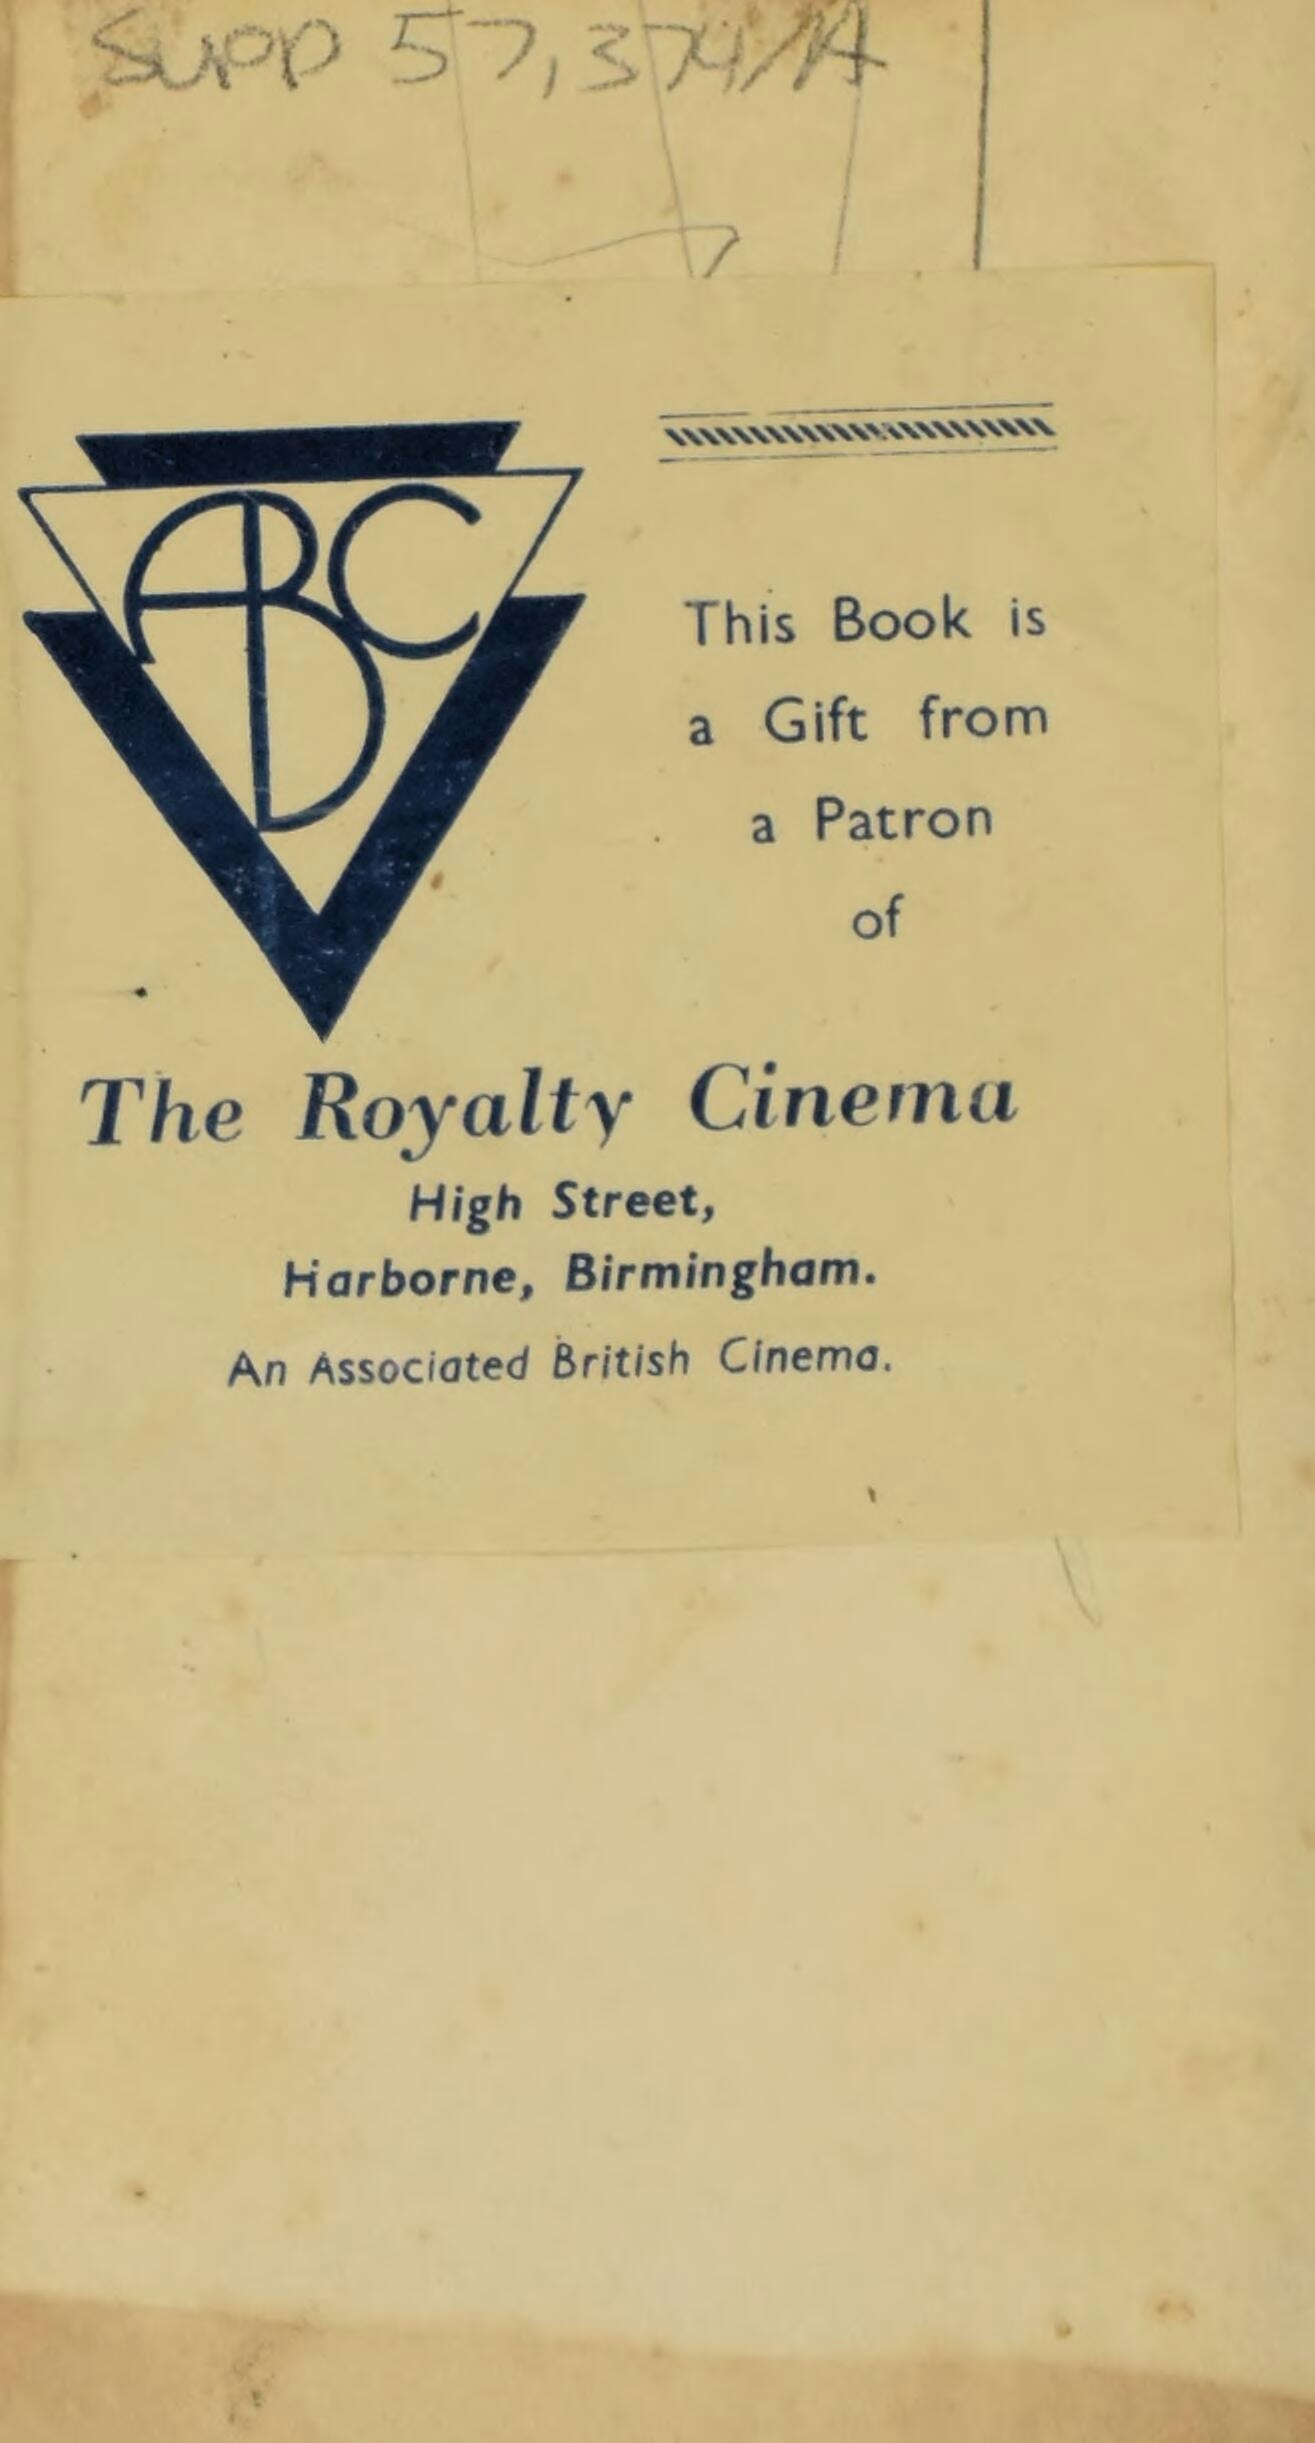 Bookplate with the logo of Associated British Cinema and the text 'This Book is a Gift from a Patron of The Royalty Cinema, High Street, Harborne, Birmingham.  An Associated British Cinema.